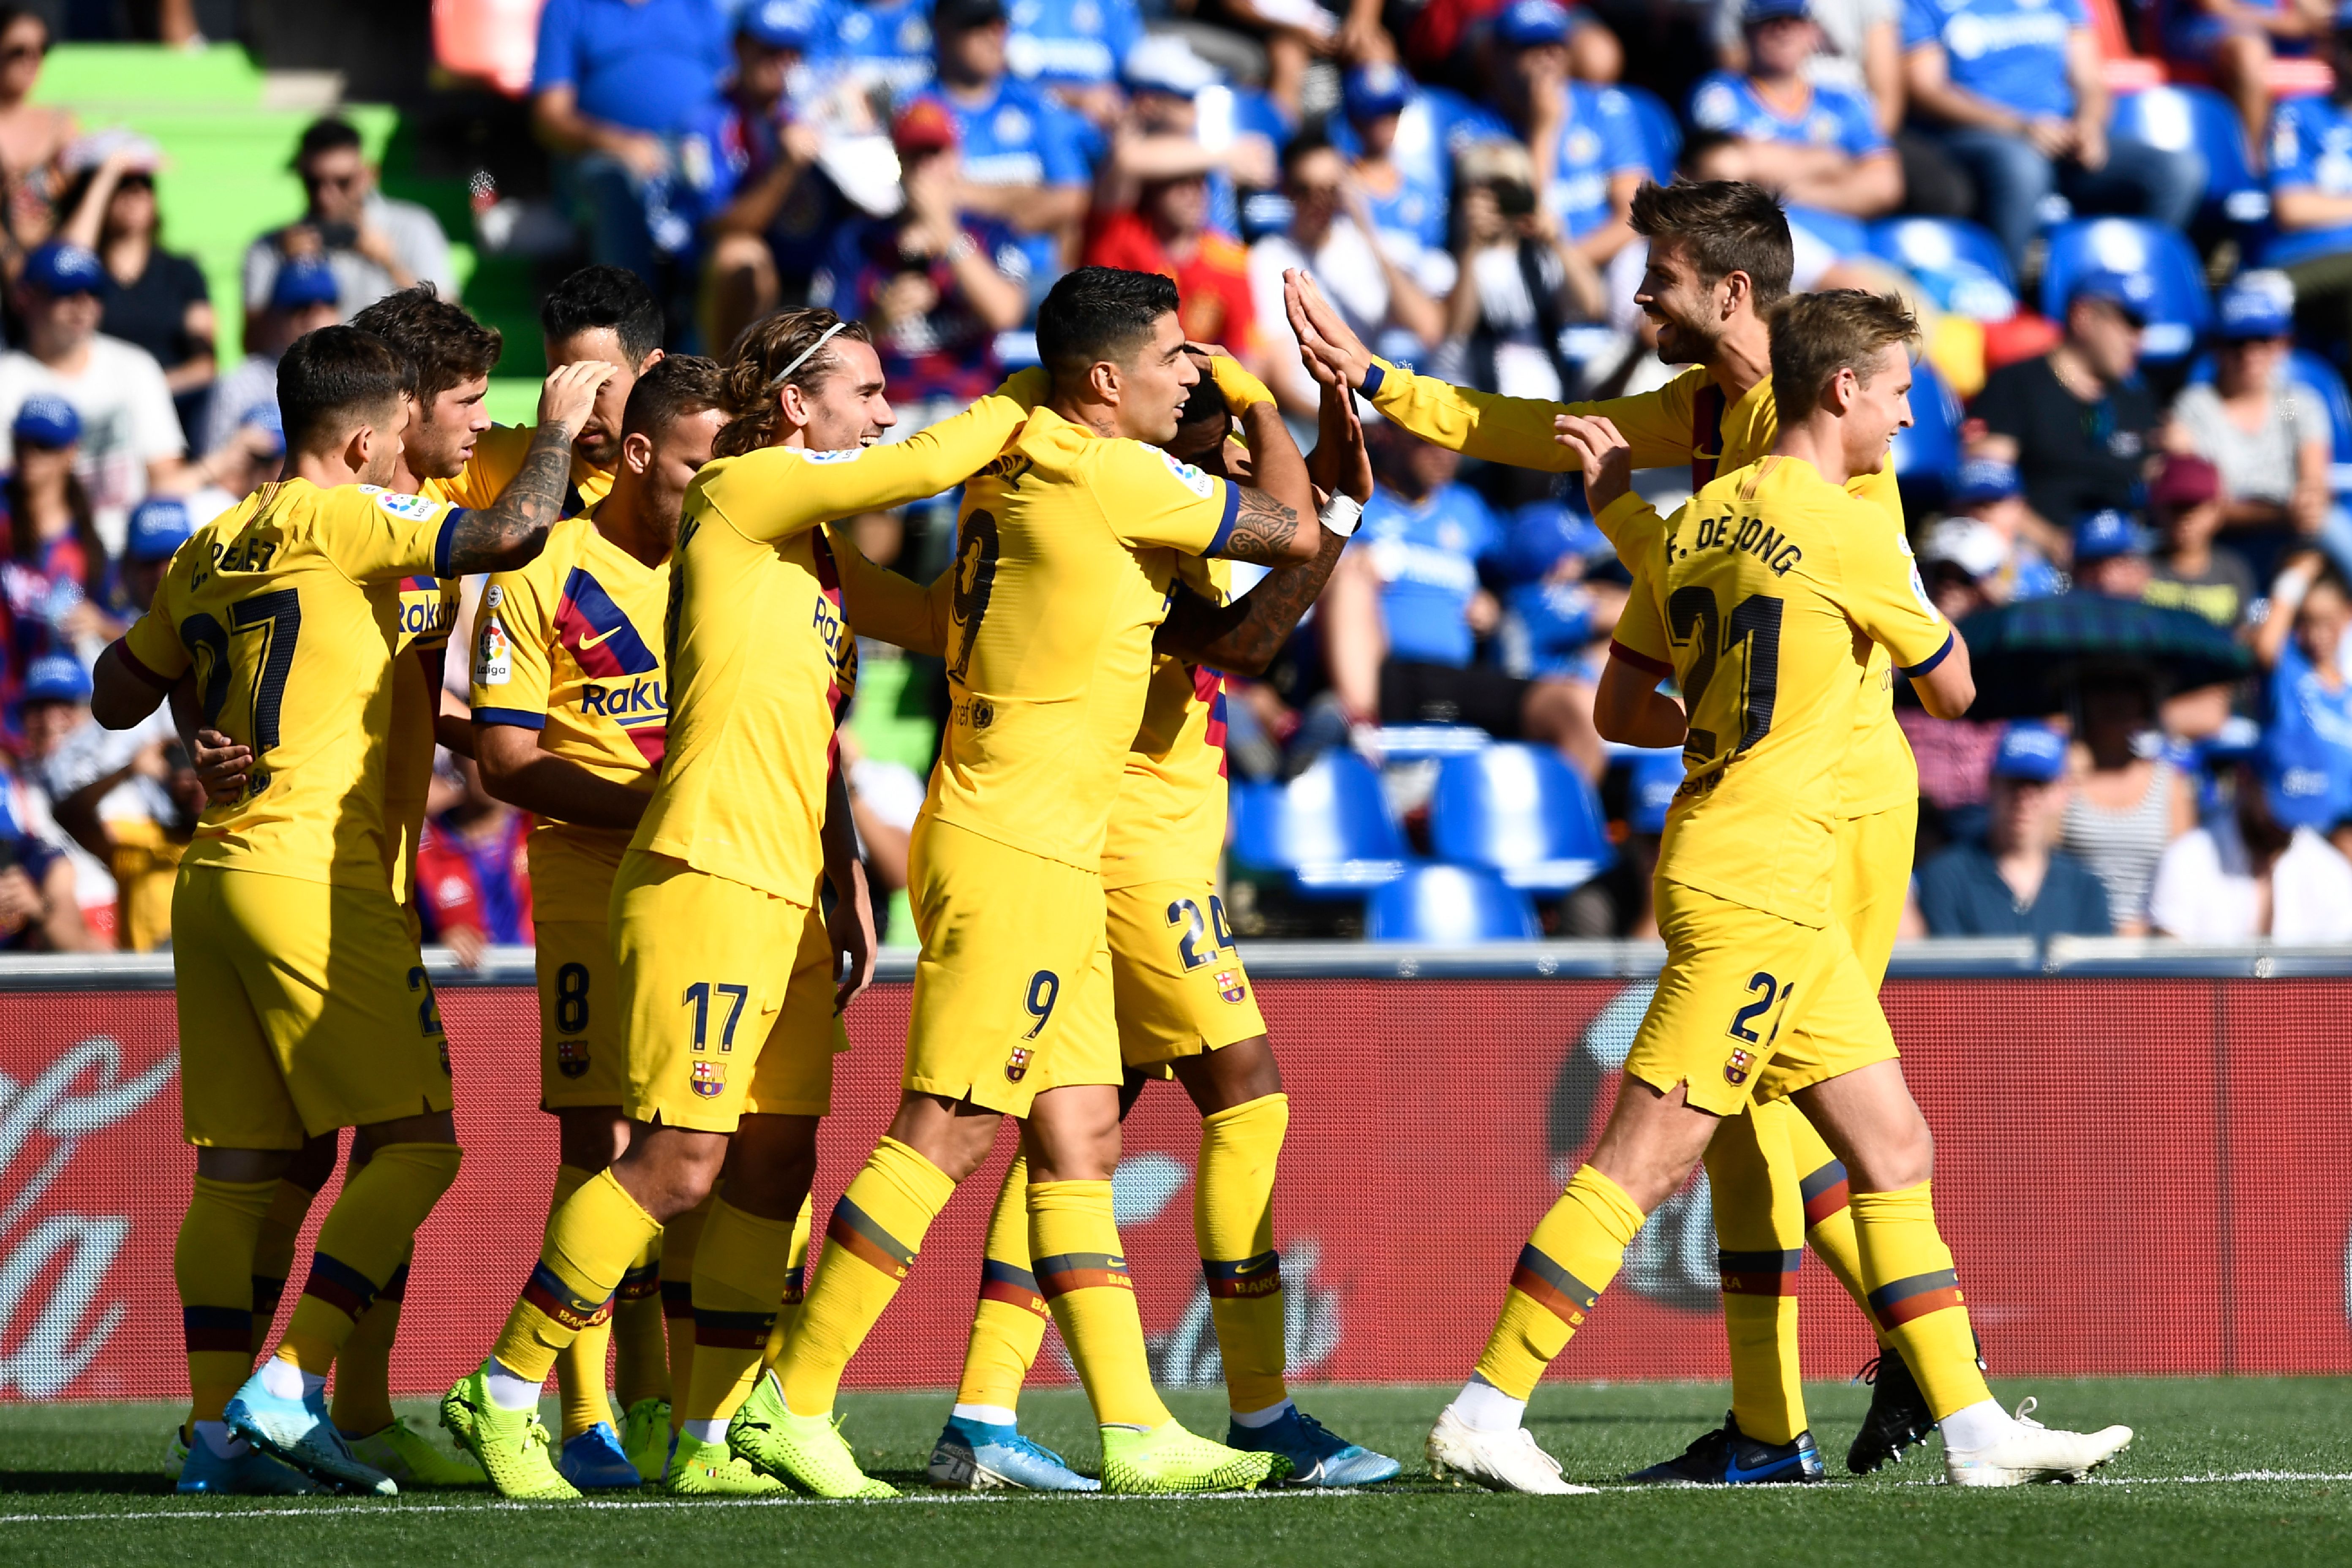 Barcelona's Spanish defender Junior Firpo (3R) celebrates with teammates after scoring a goal during the Spanish league football match between Getafe CF and FC Barcelona at the Col. Alfonso Perez stadium in Getafe on September 28, 2019. (Photo by OSCAR DEL POZO / AFP)        (Photo credit should read OSCAR DEL POZO/AFP/Getty Images)